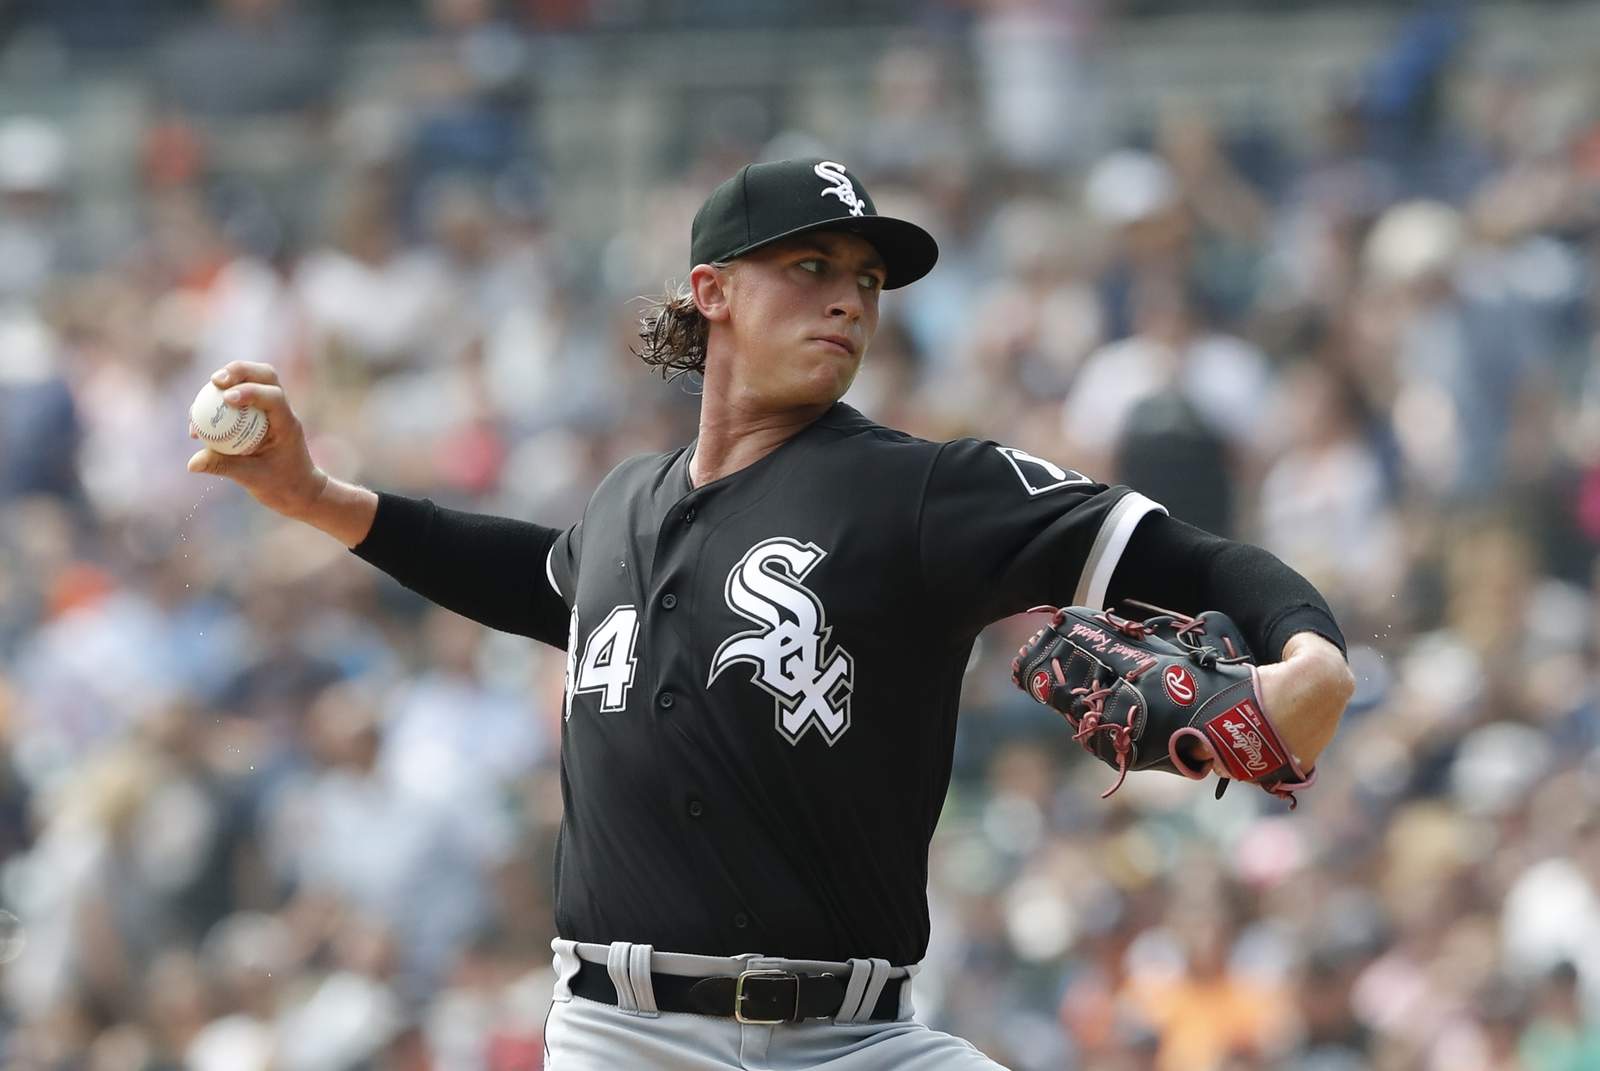 White Sox top pitching prospect Kopech opts out this year